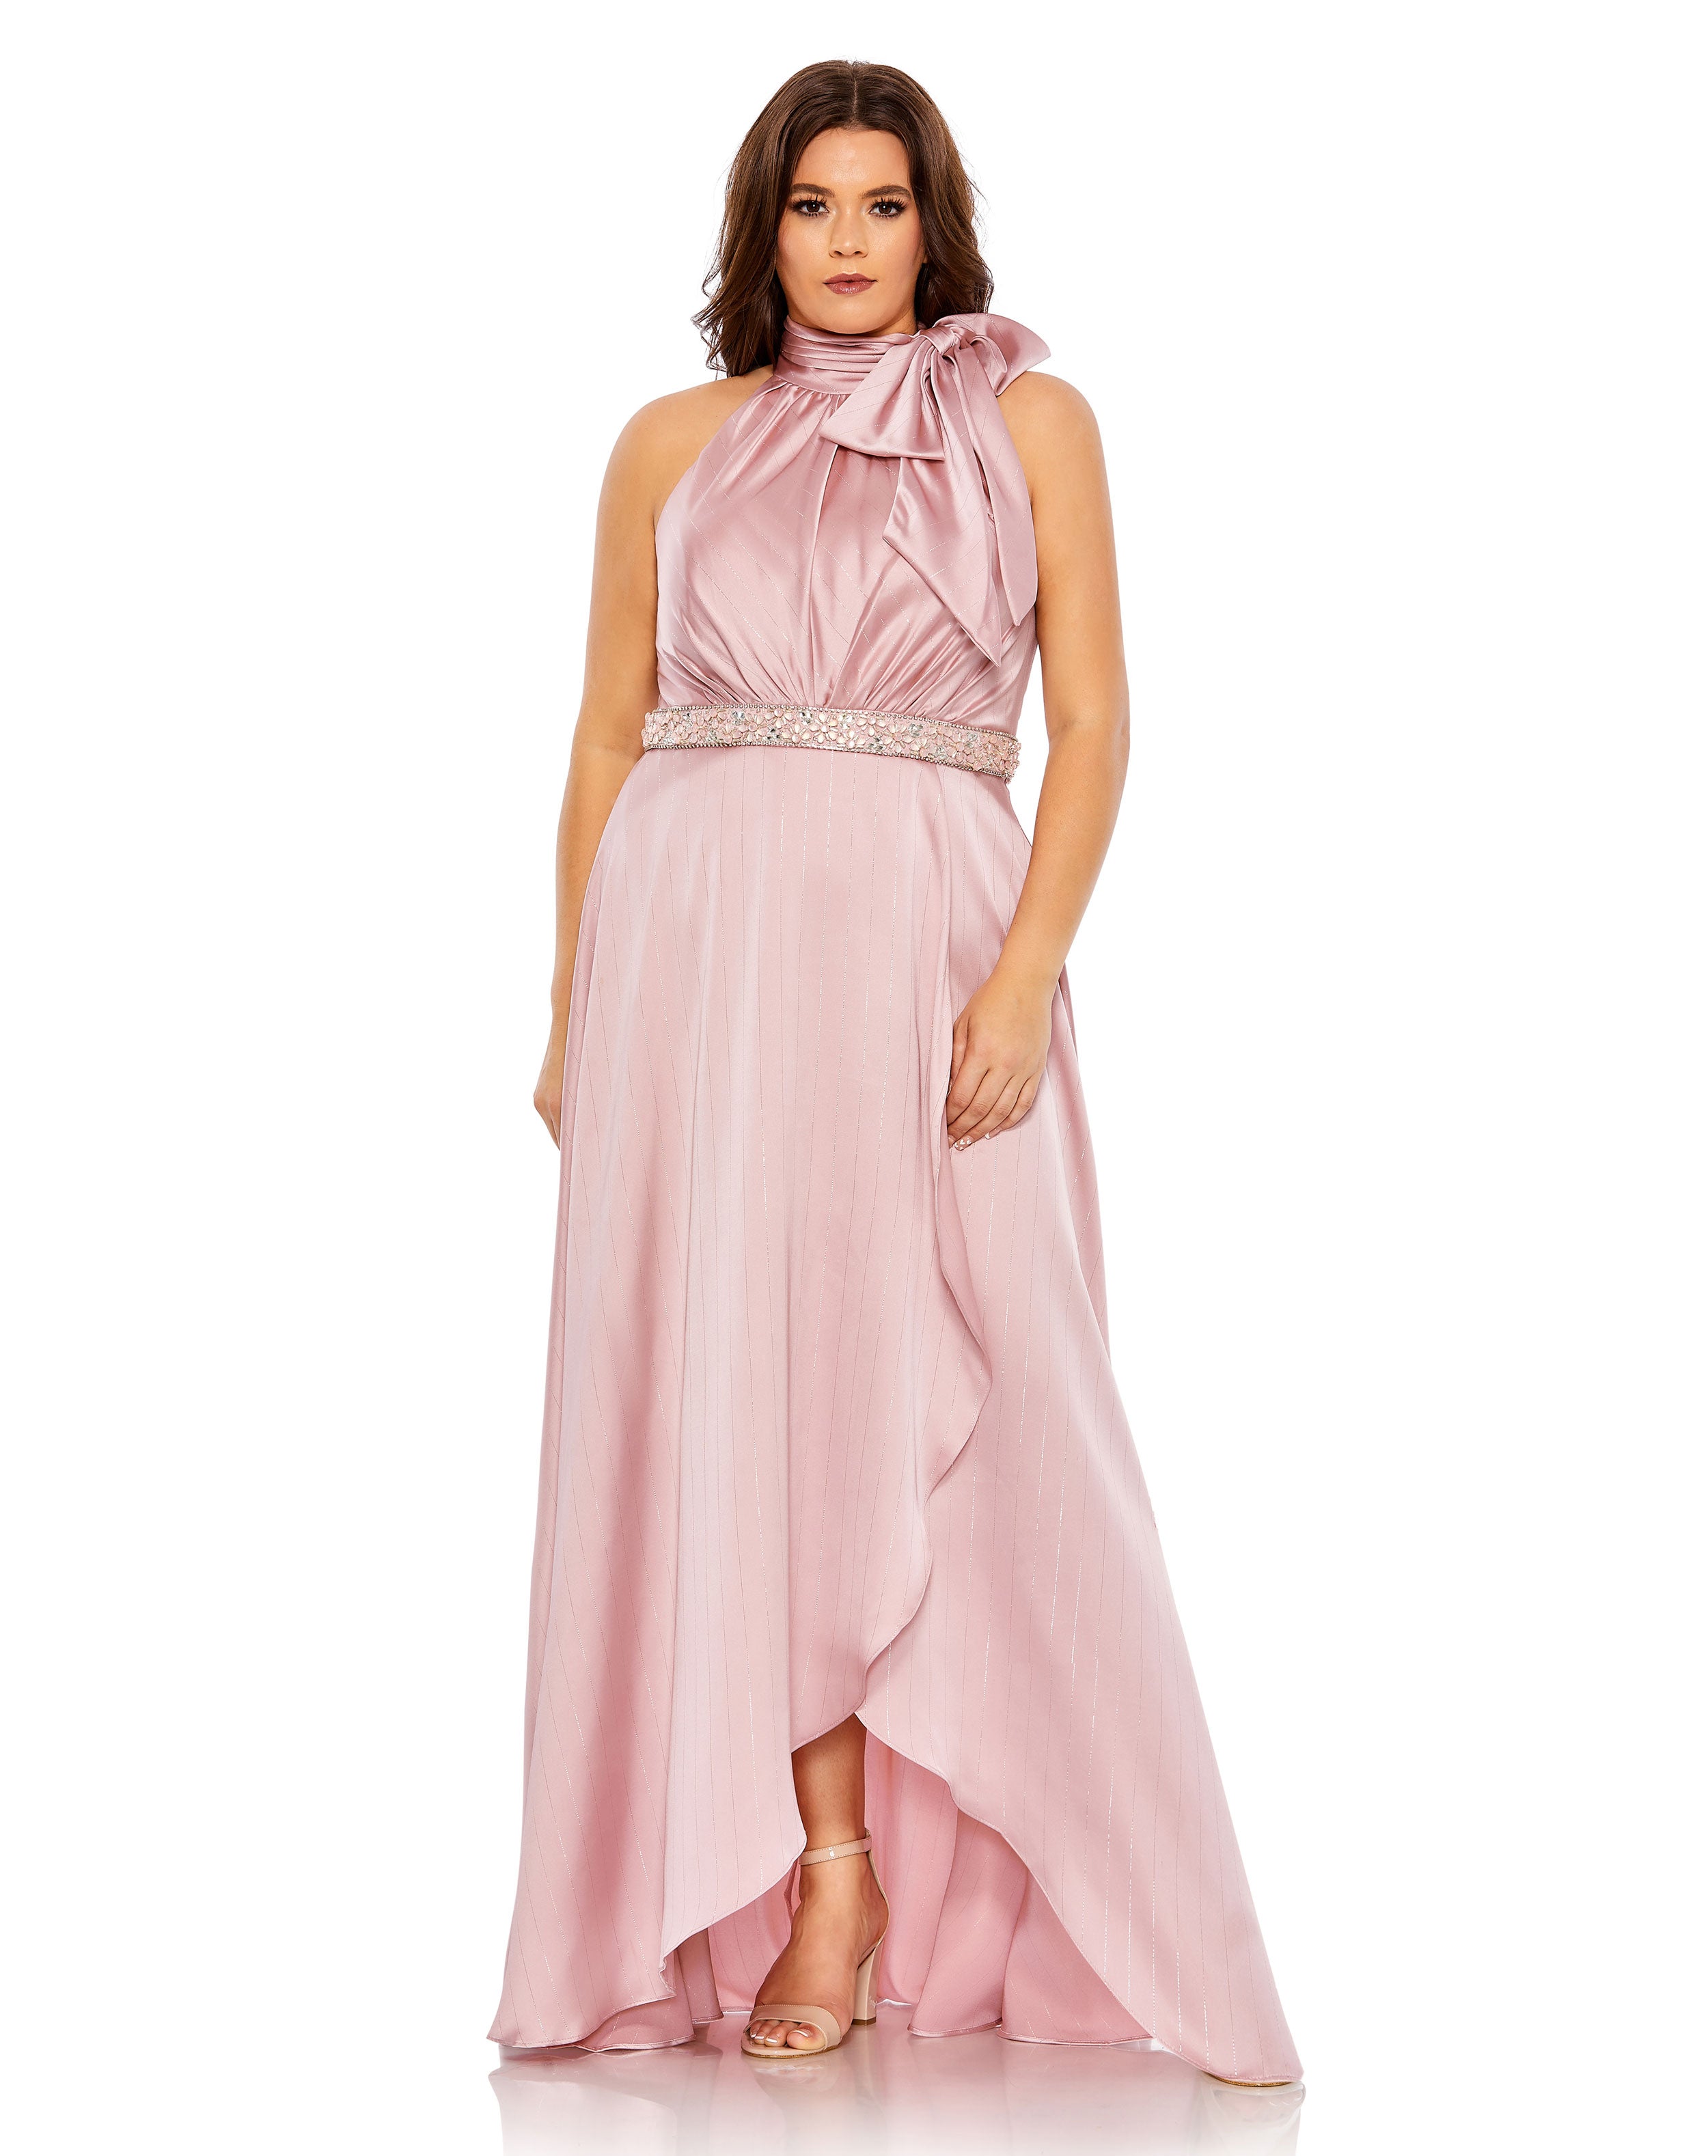 High Neck Soft Tie Beaded Belt Gown (Plus)